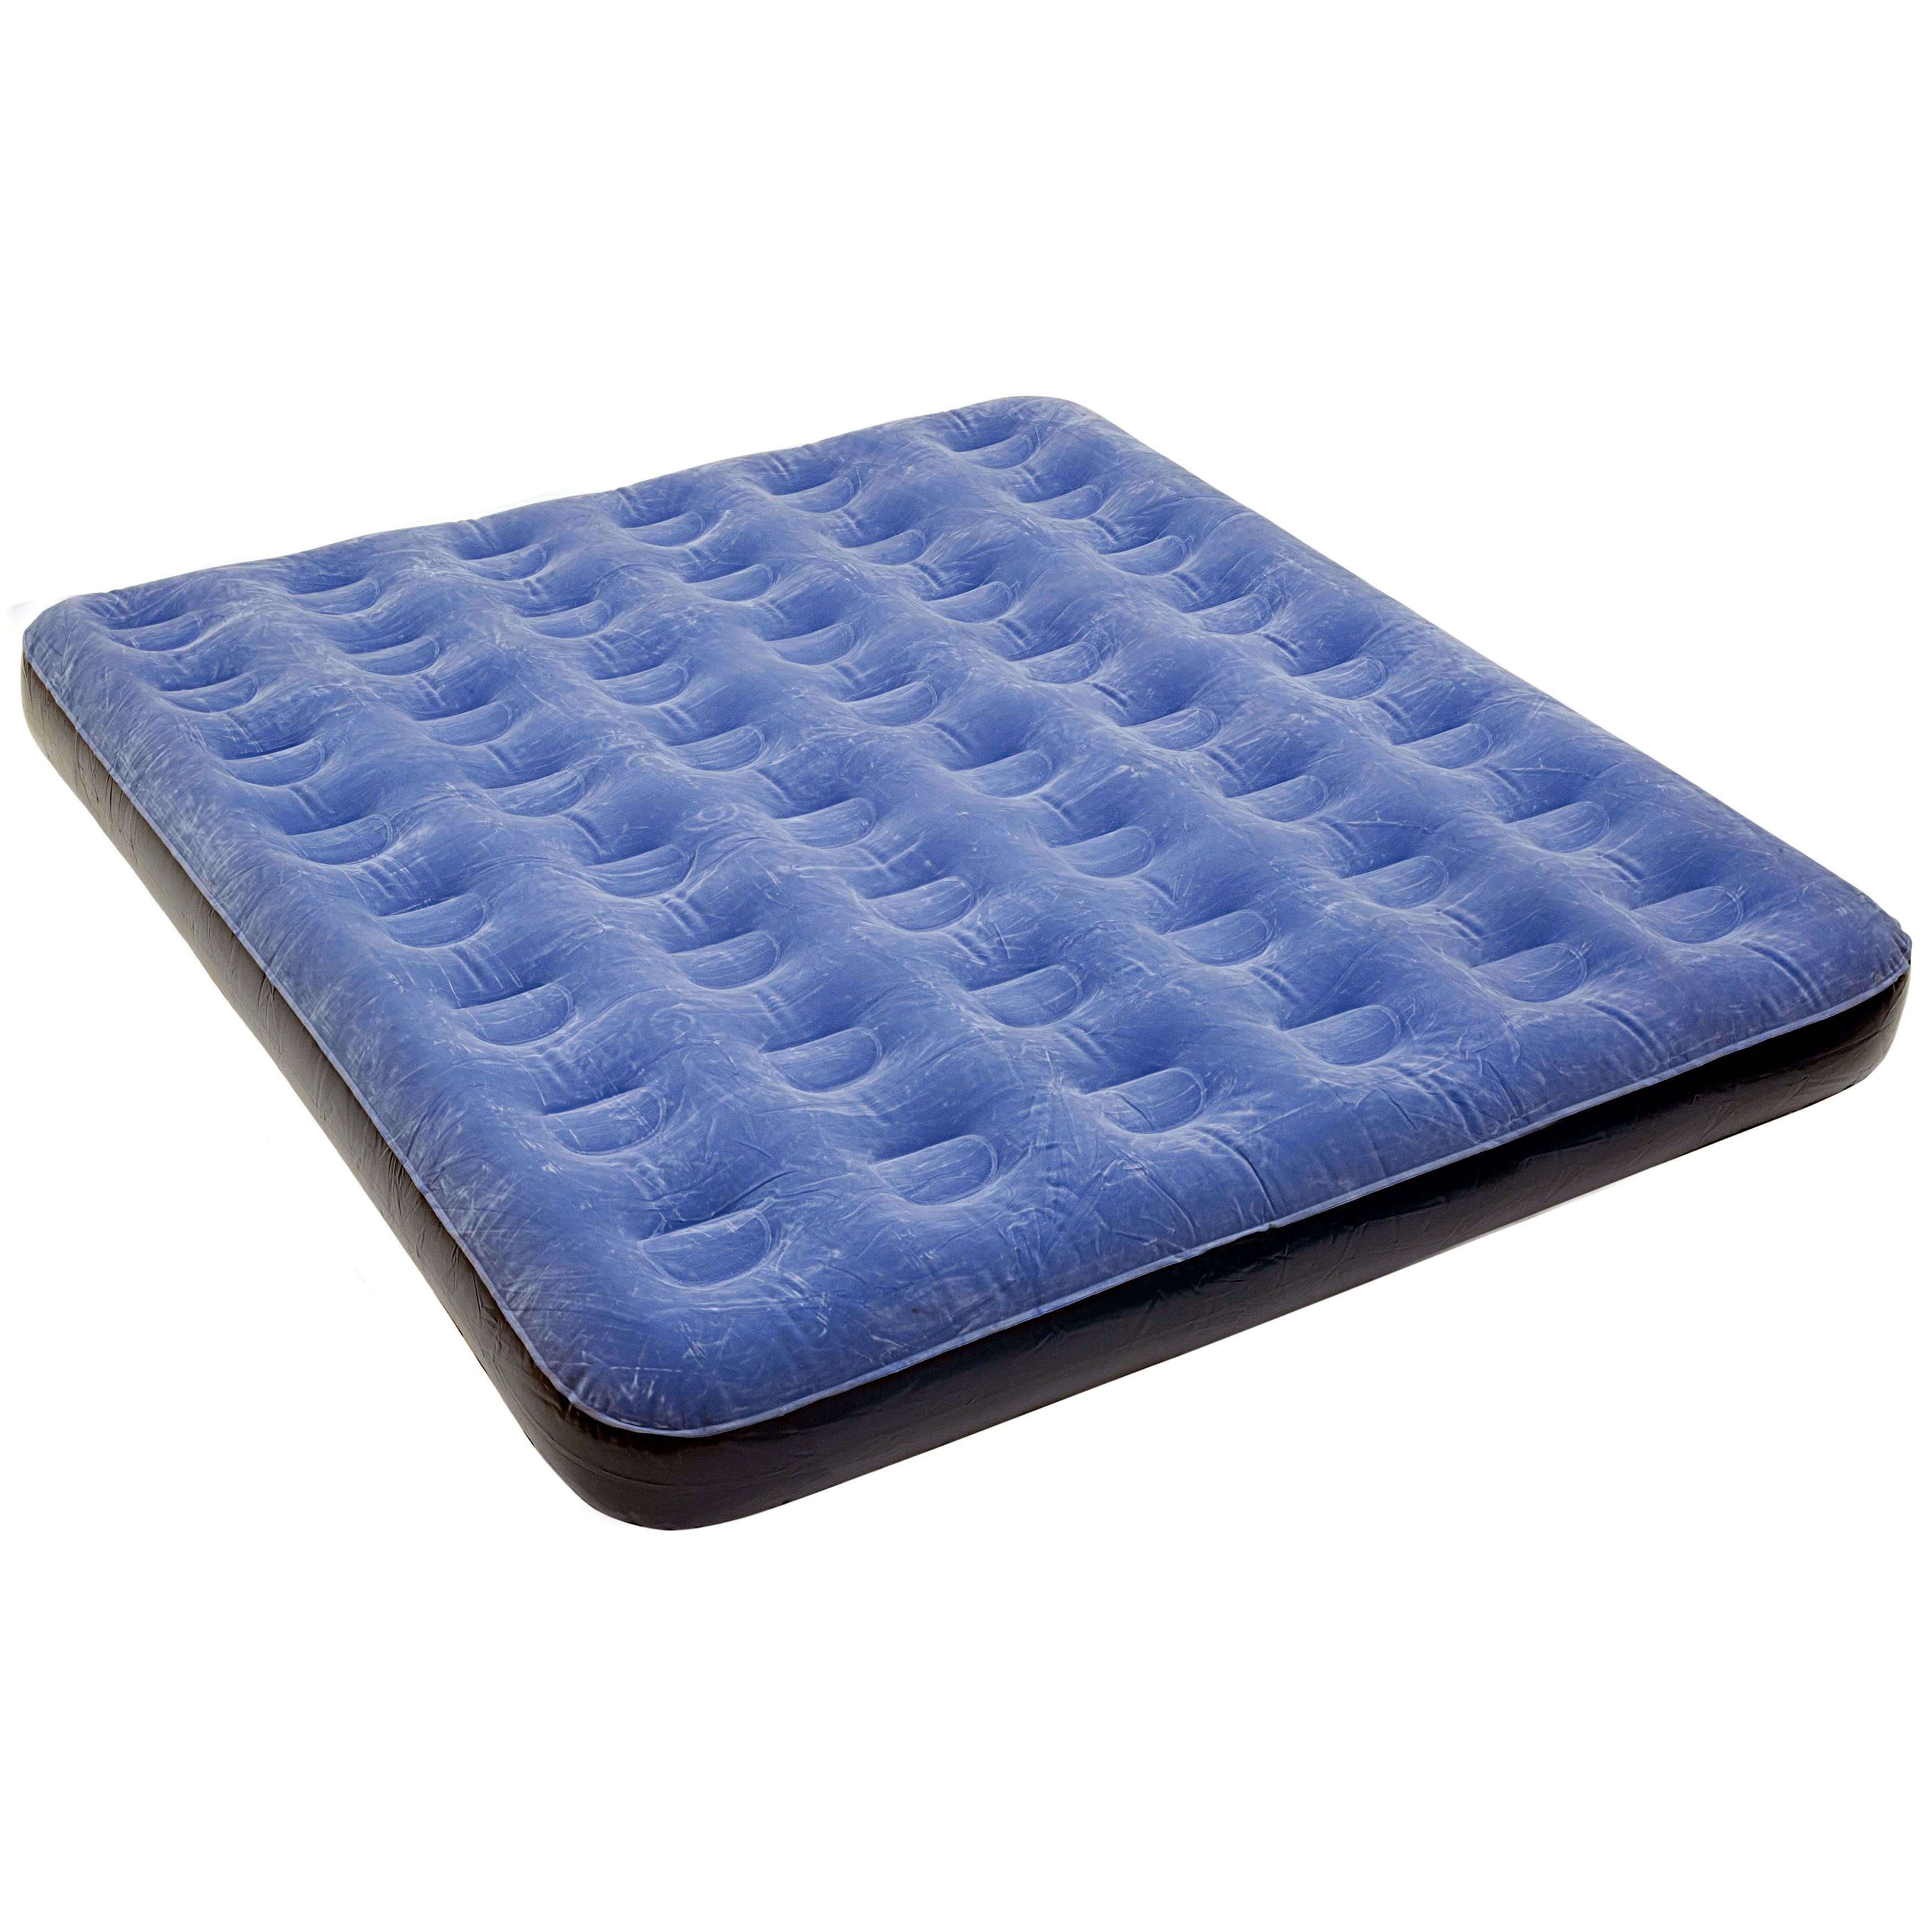 The Pure Comfort Queen Size Air Mattress is the ultimate solution for comfo...